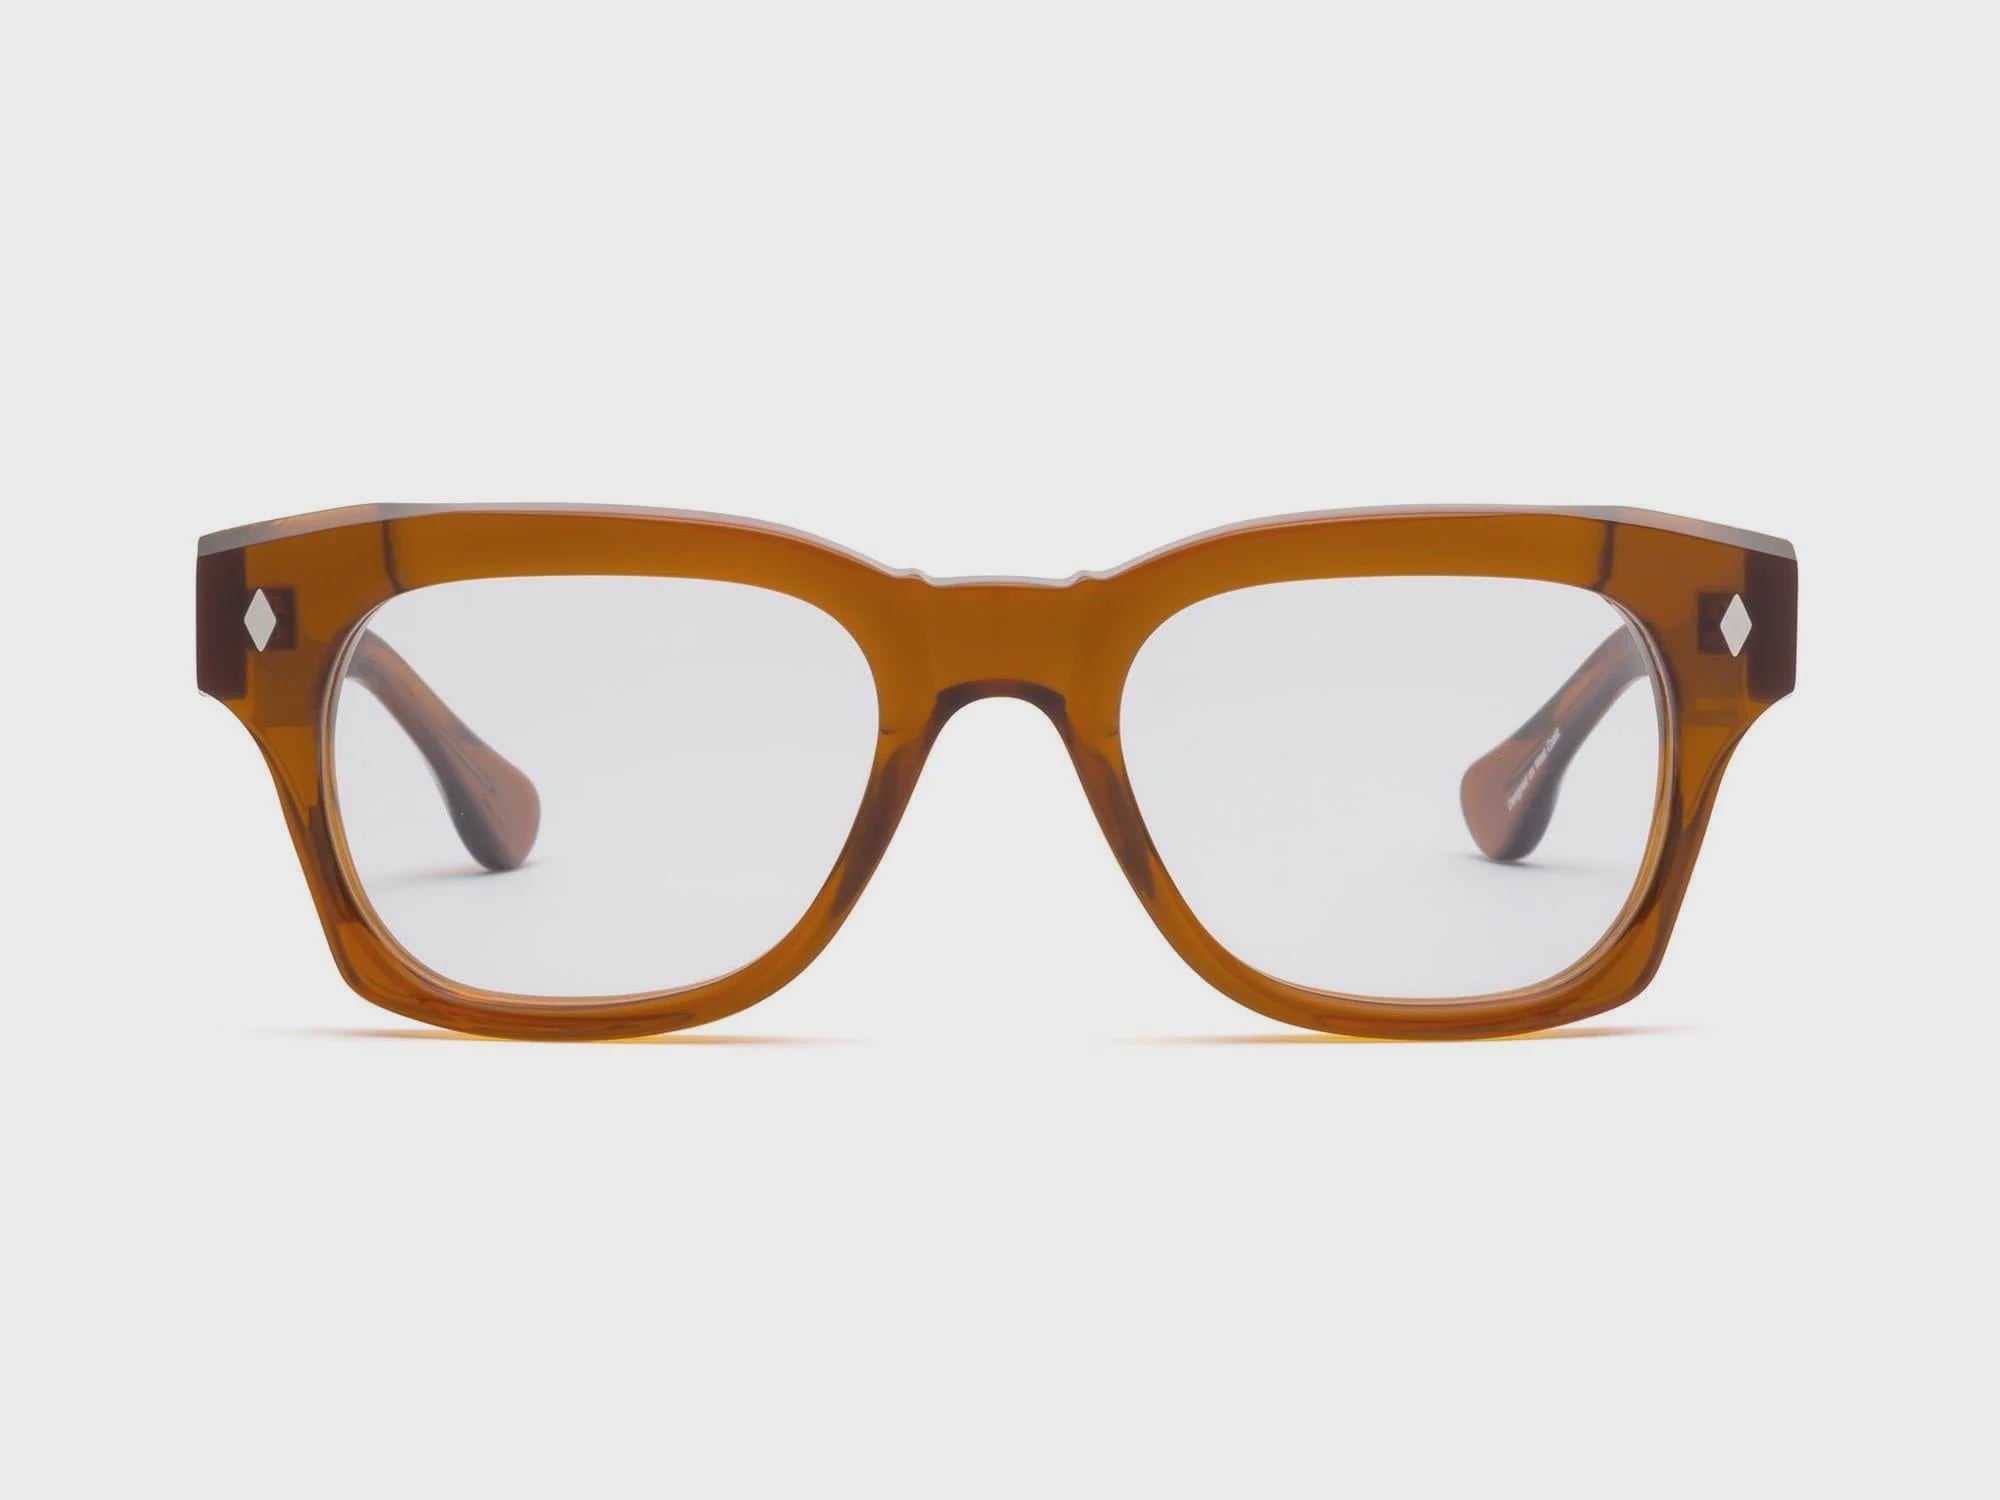 A pair of stylish, brown tortoiseshell Muzzy Progressives Gopher eyeglasses by Caddis with premium hard coating on the clear lenses, isolated on a white background.